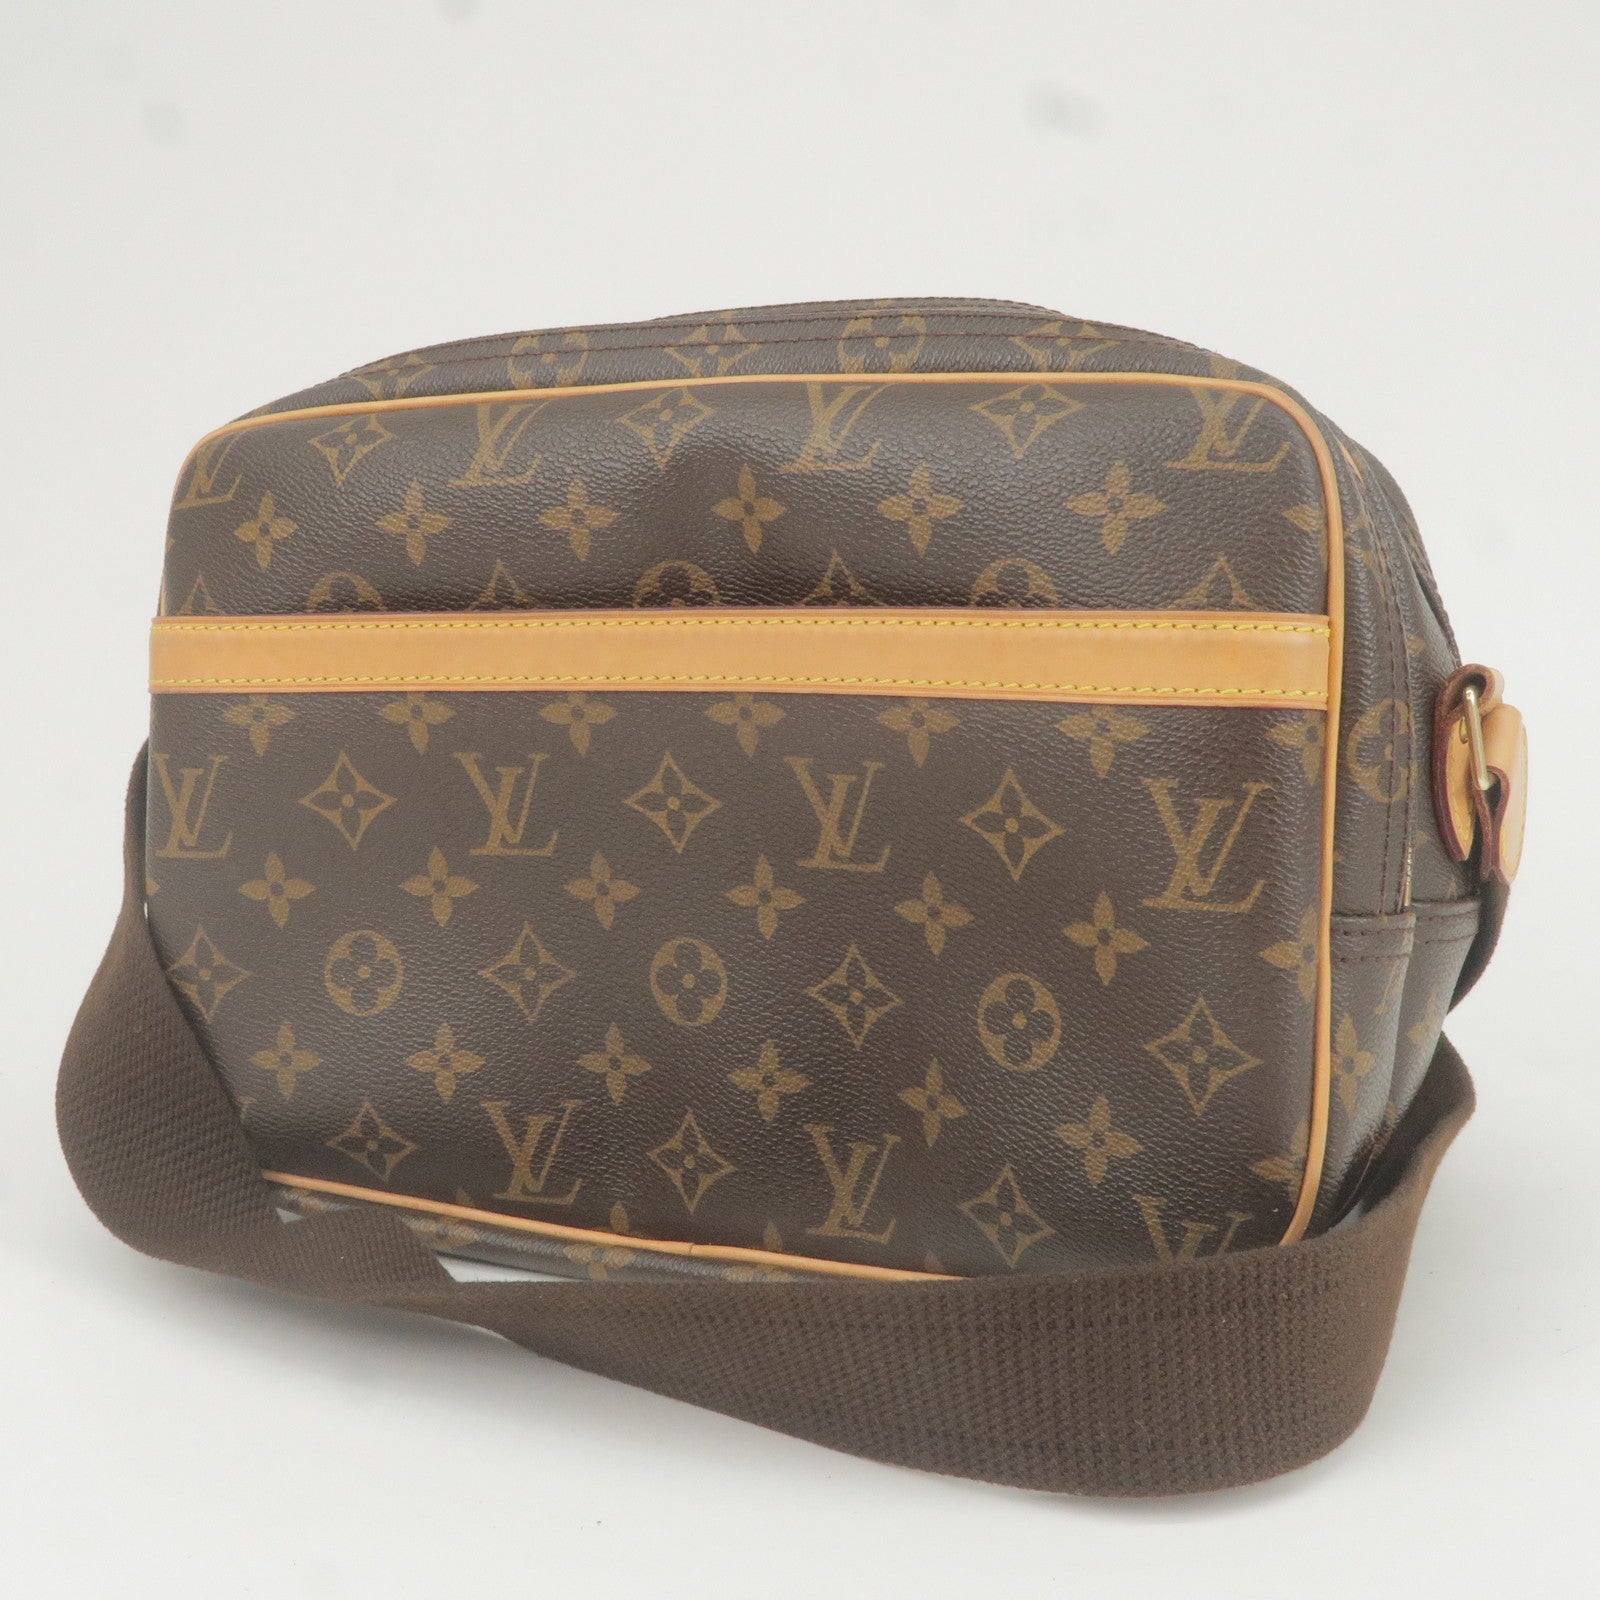 Louis Vuitton 2018 pre-owned Neverfull MM Tote Bag - Farfetch